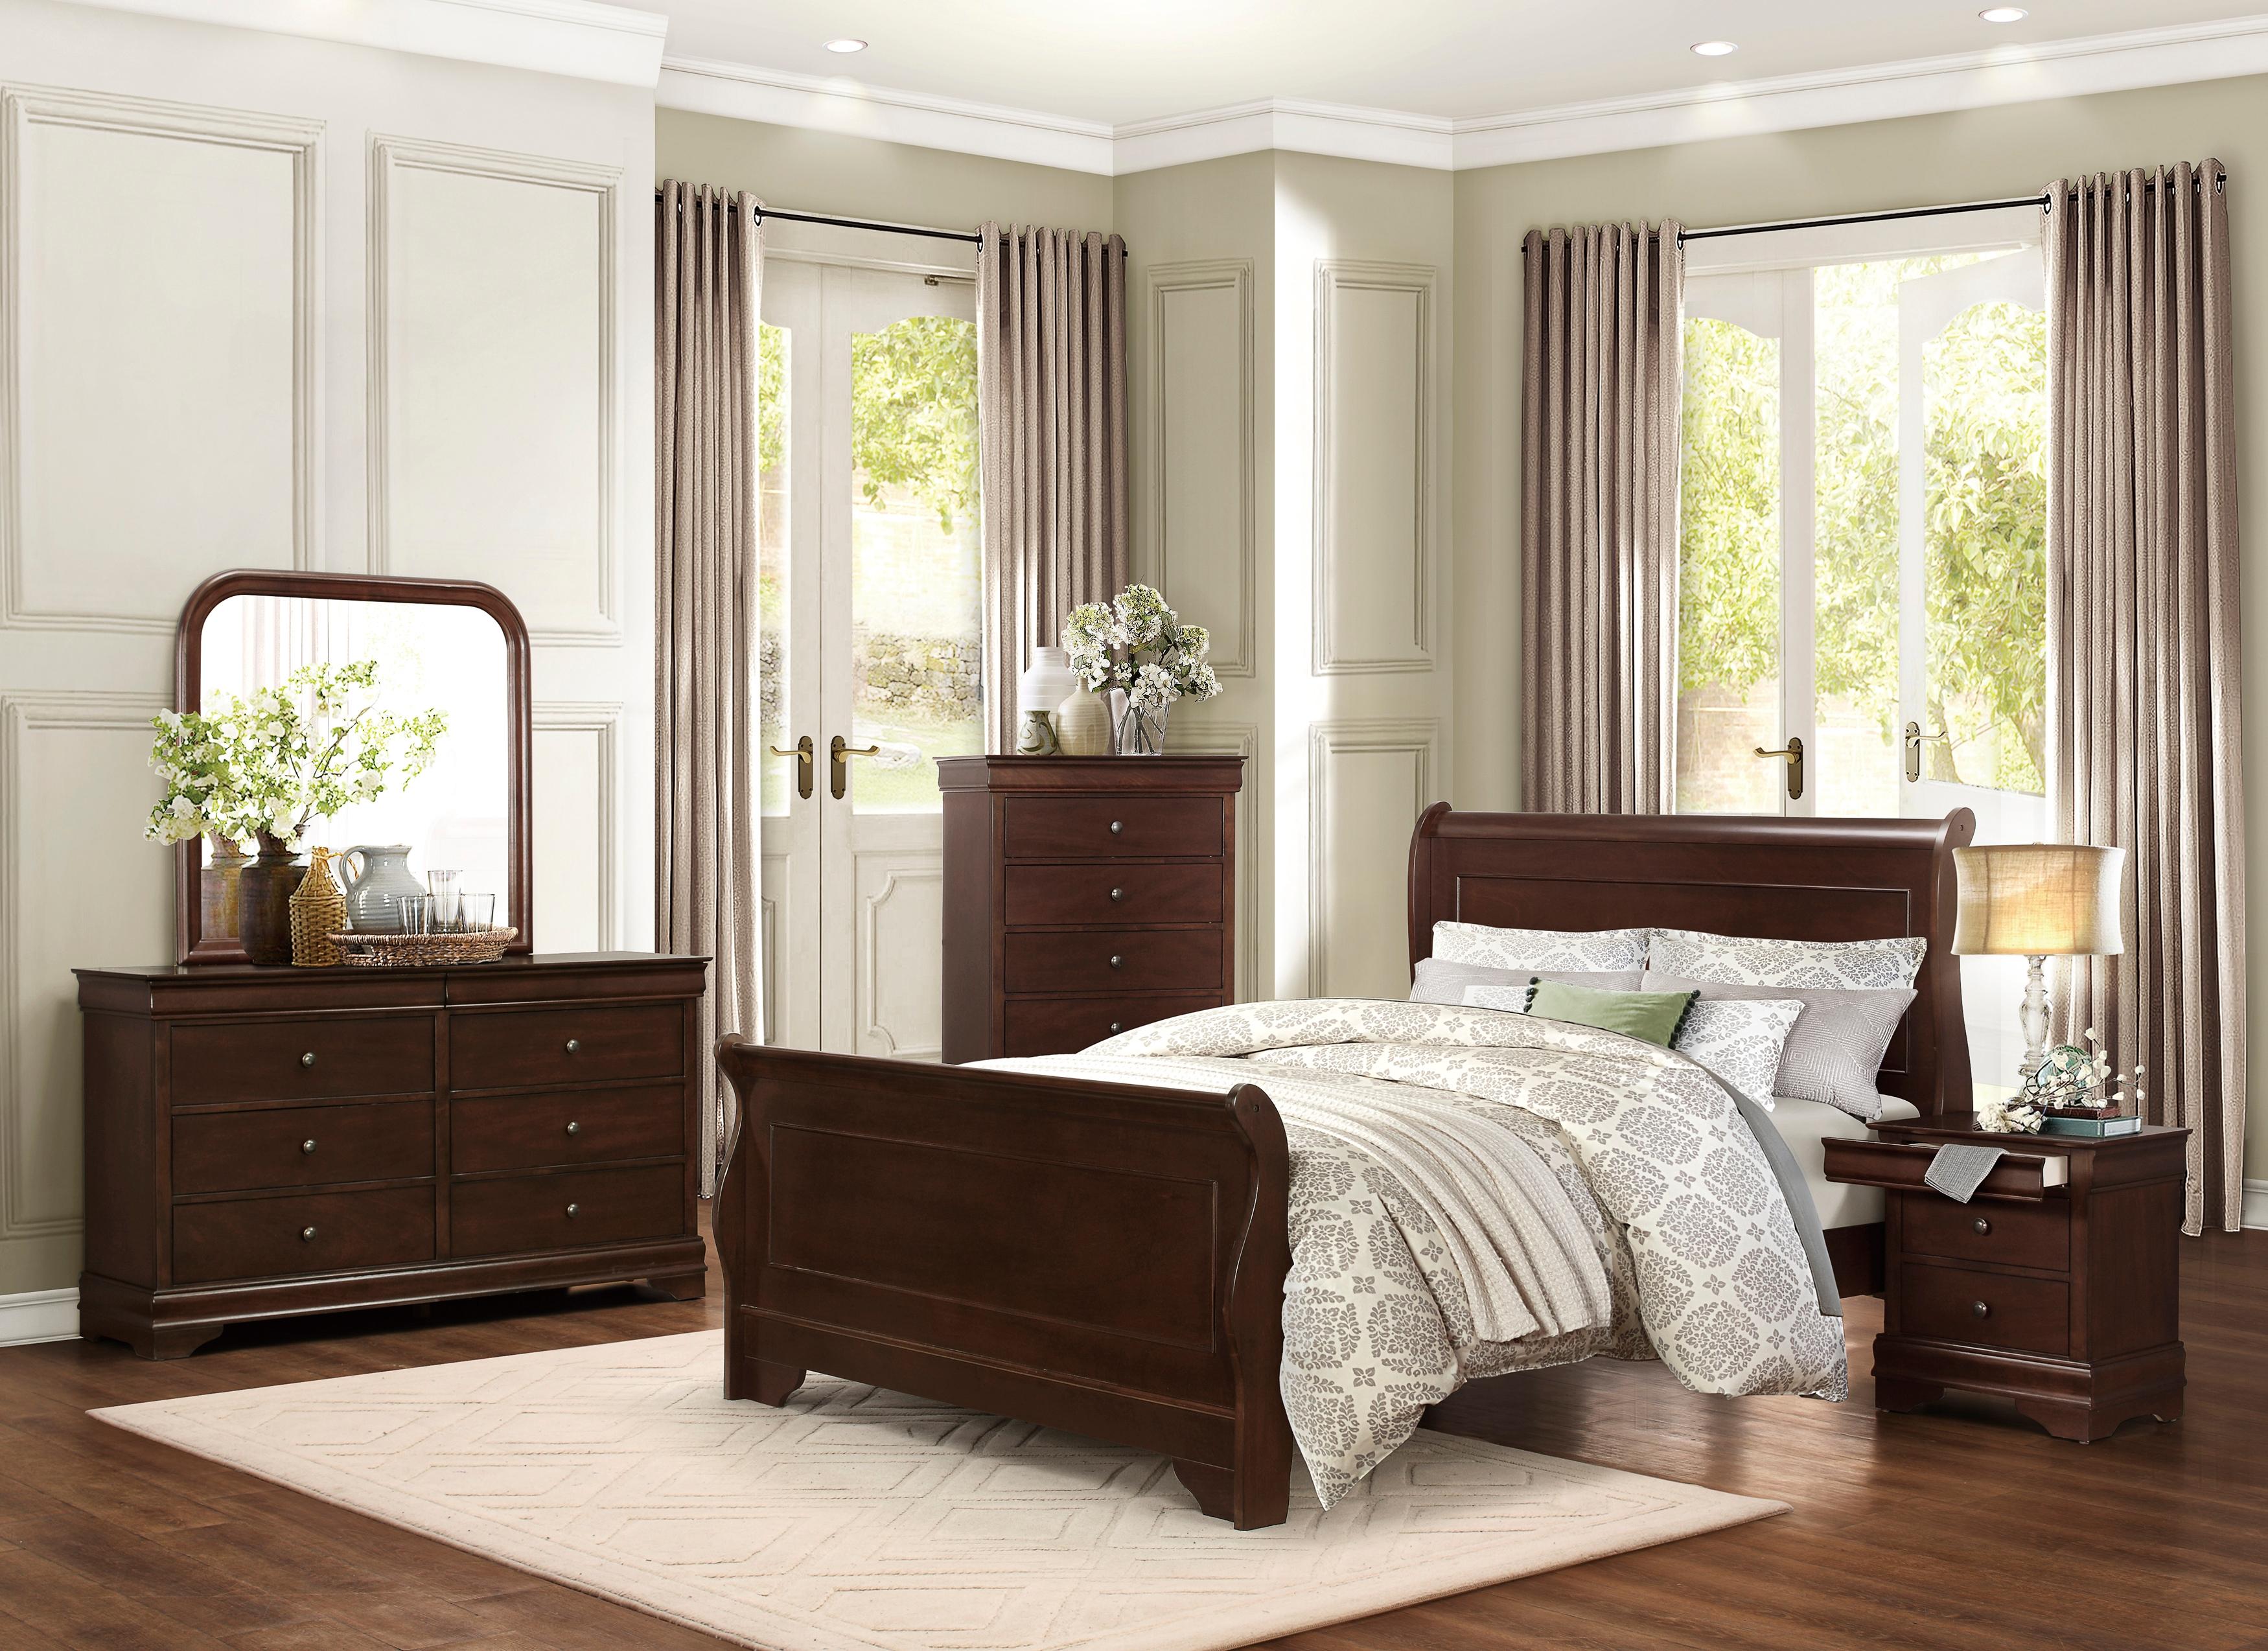 Modern Bedroom Set 1856F-1-5PC Abbeville 1856F-1-5PC in Cherry 